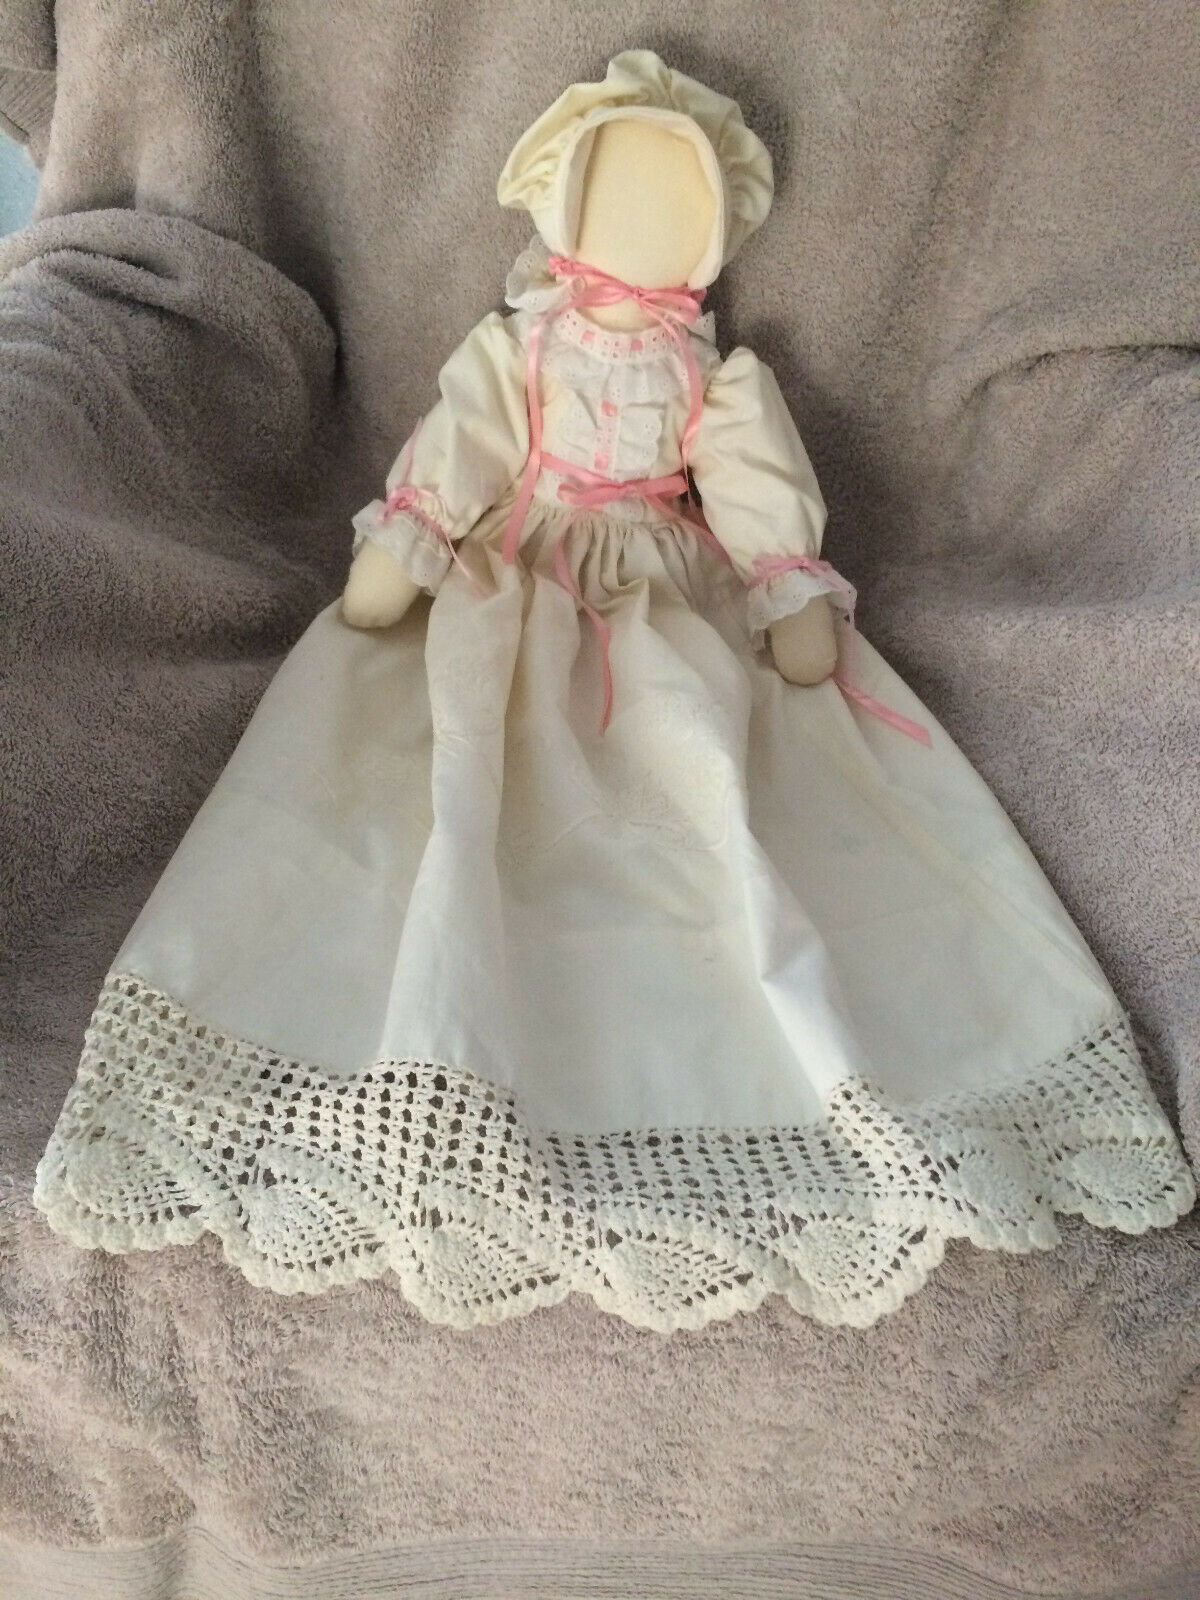 Fabric Doll Penney's Percale - Great Condition!